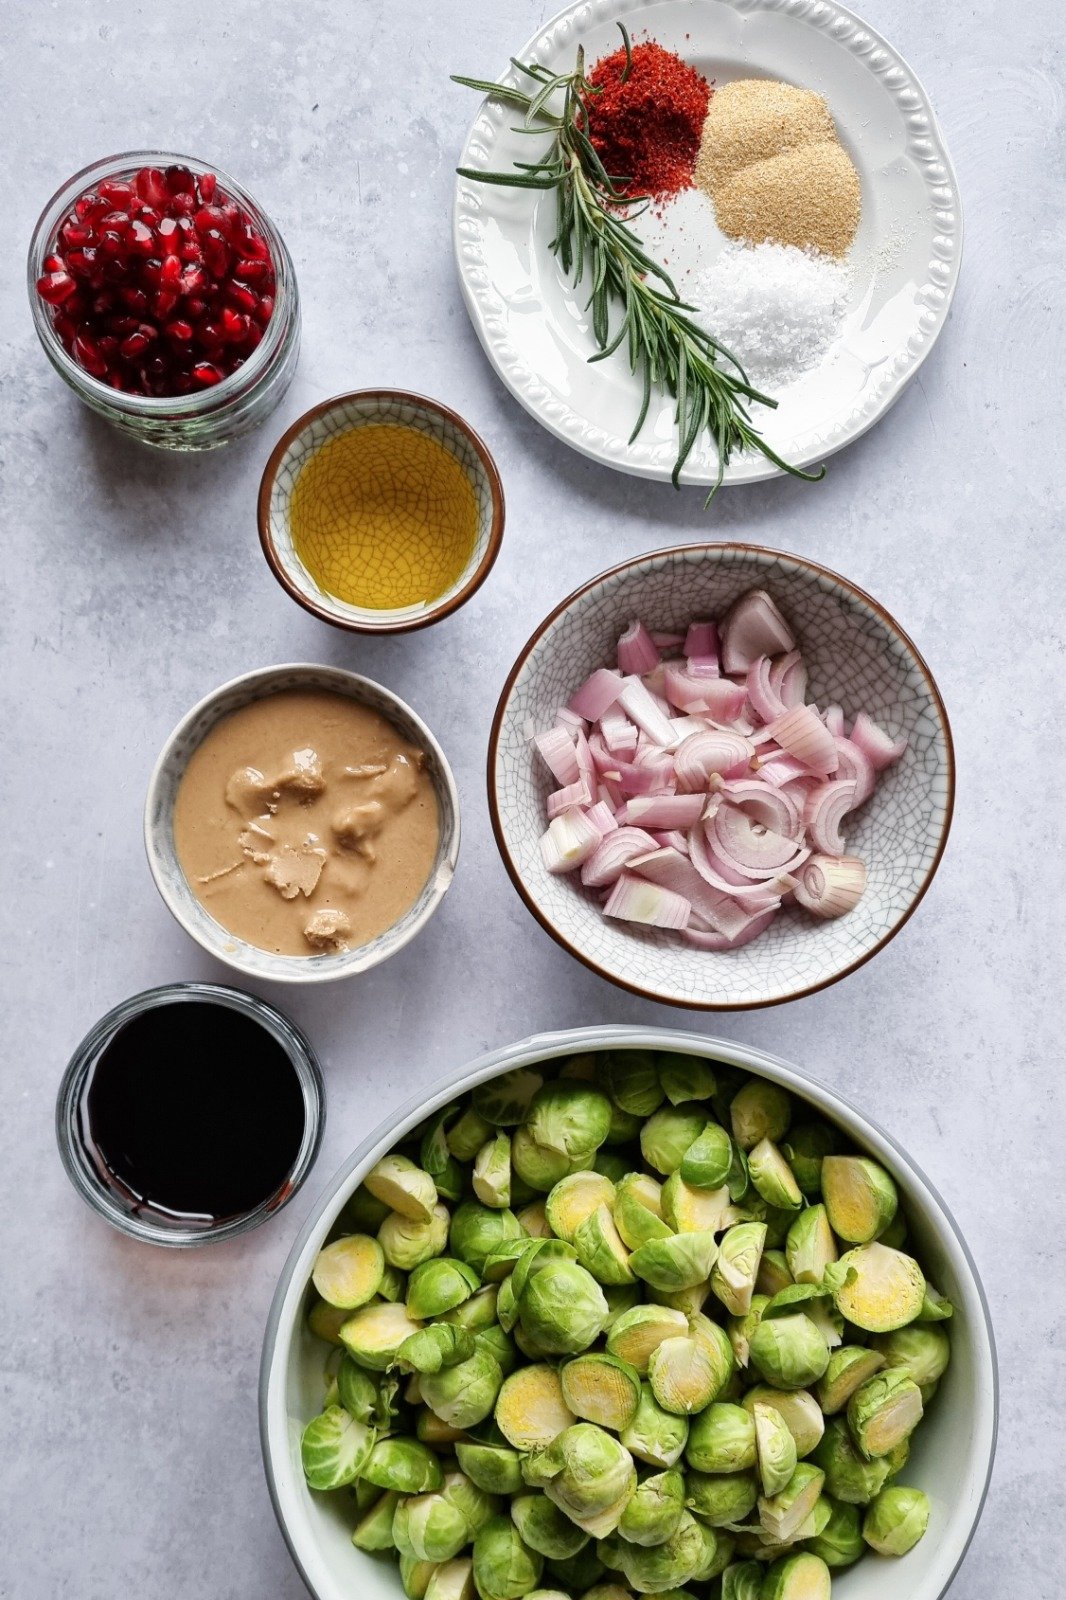 The ingredients needed to make Tahini and pomegranate brussels sprouts
